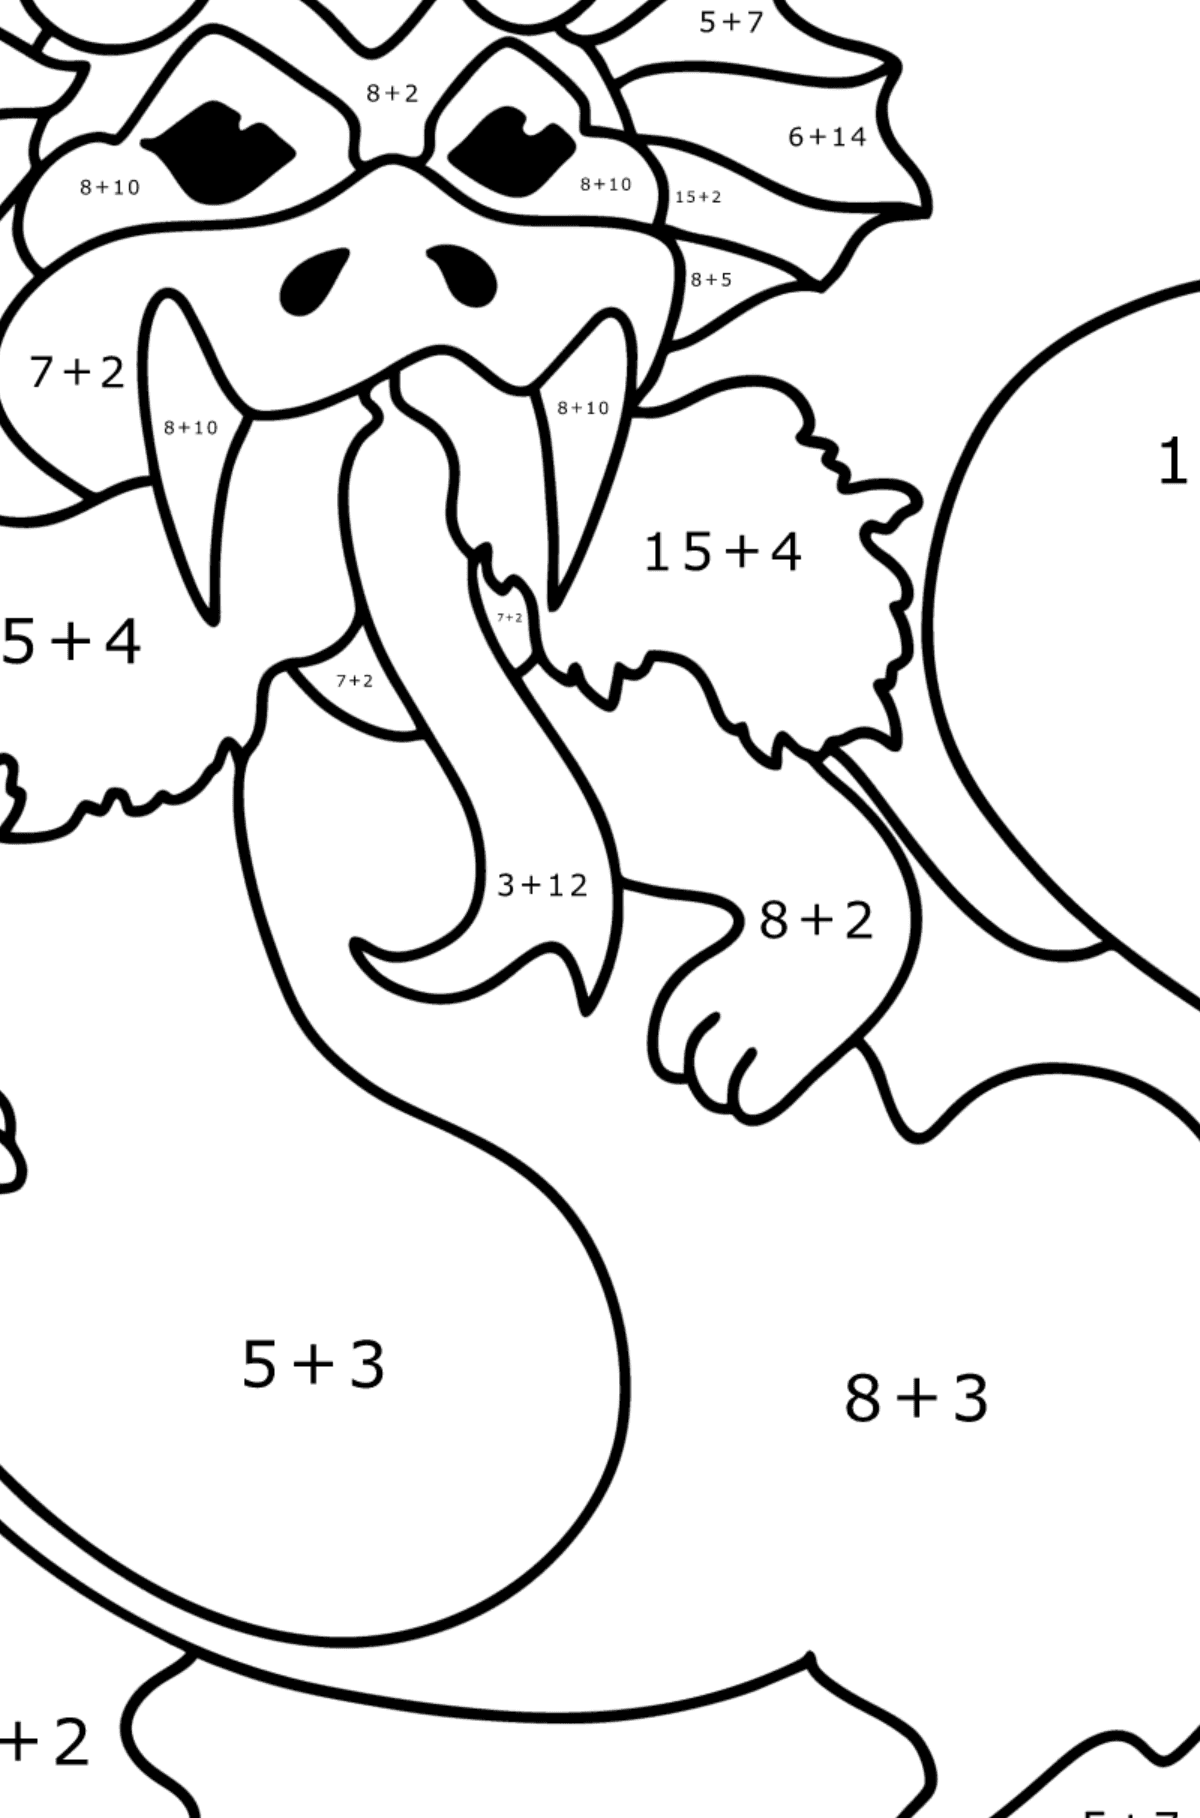 The dragon starts fire coloring page - Math Coloring - Addition for Kids